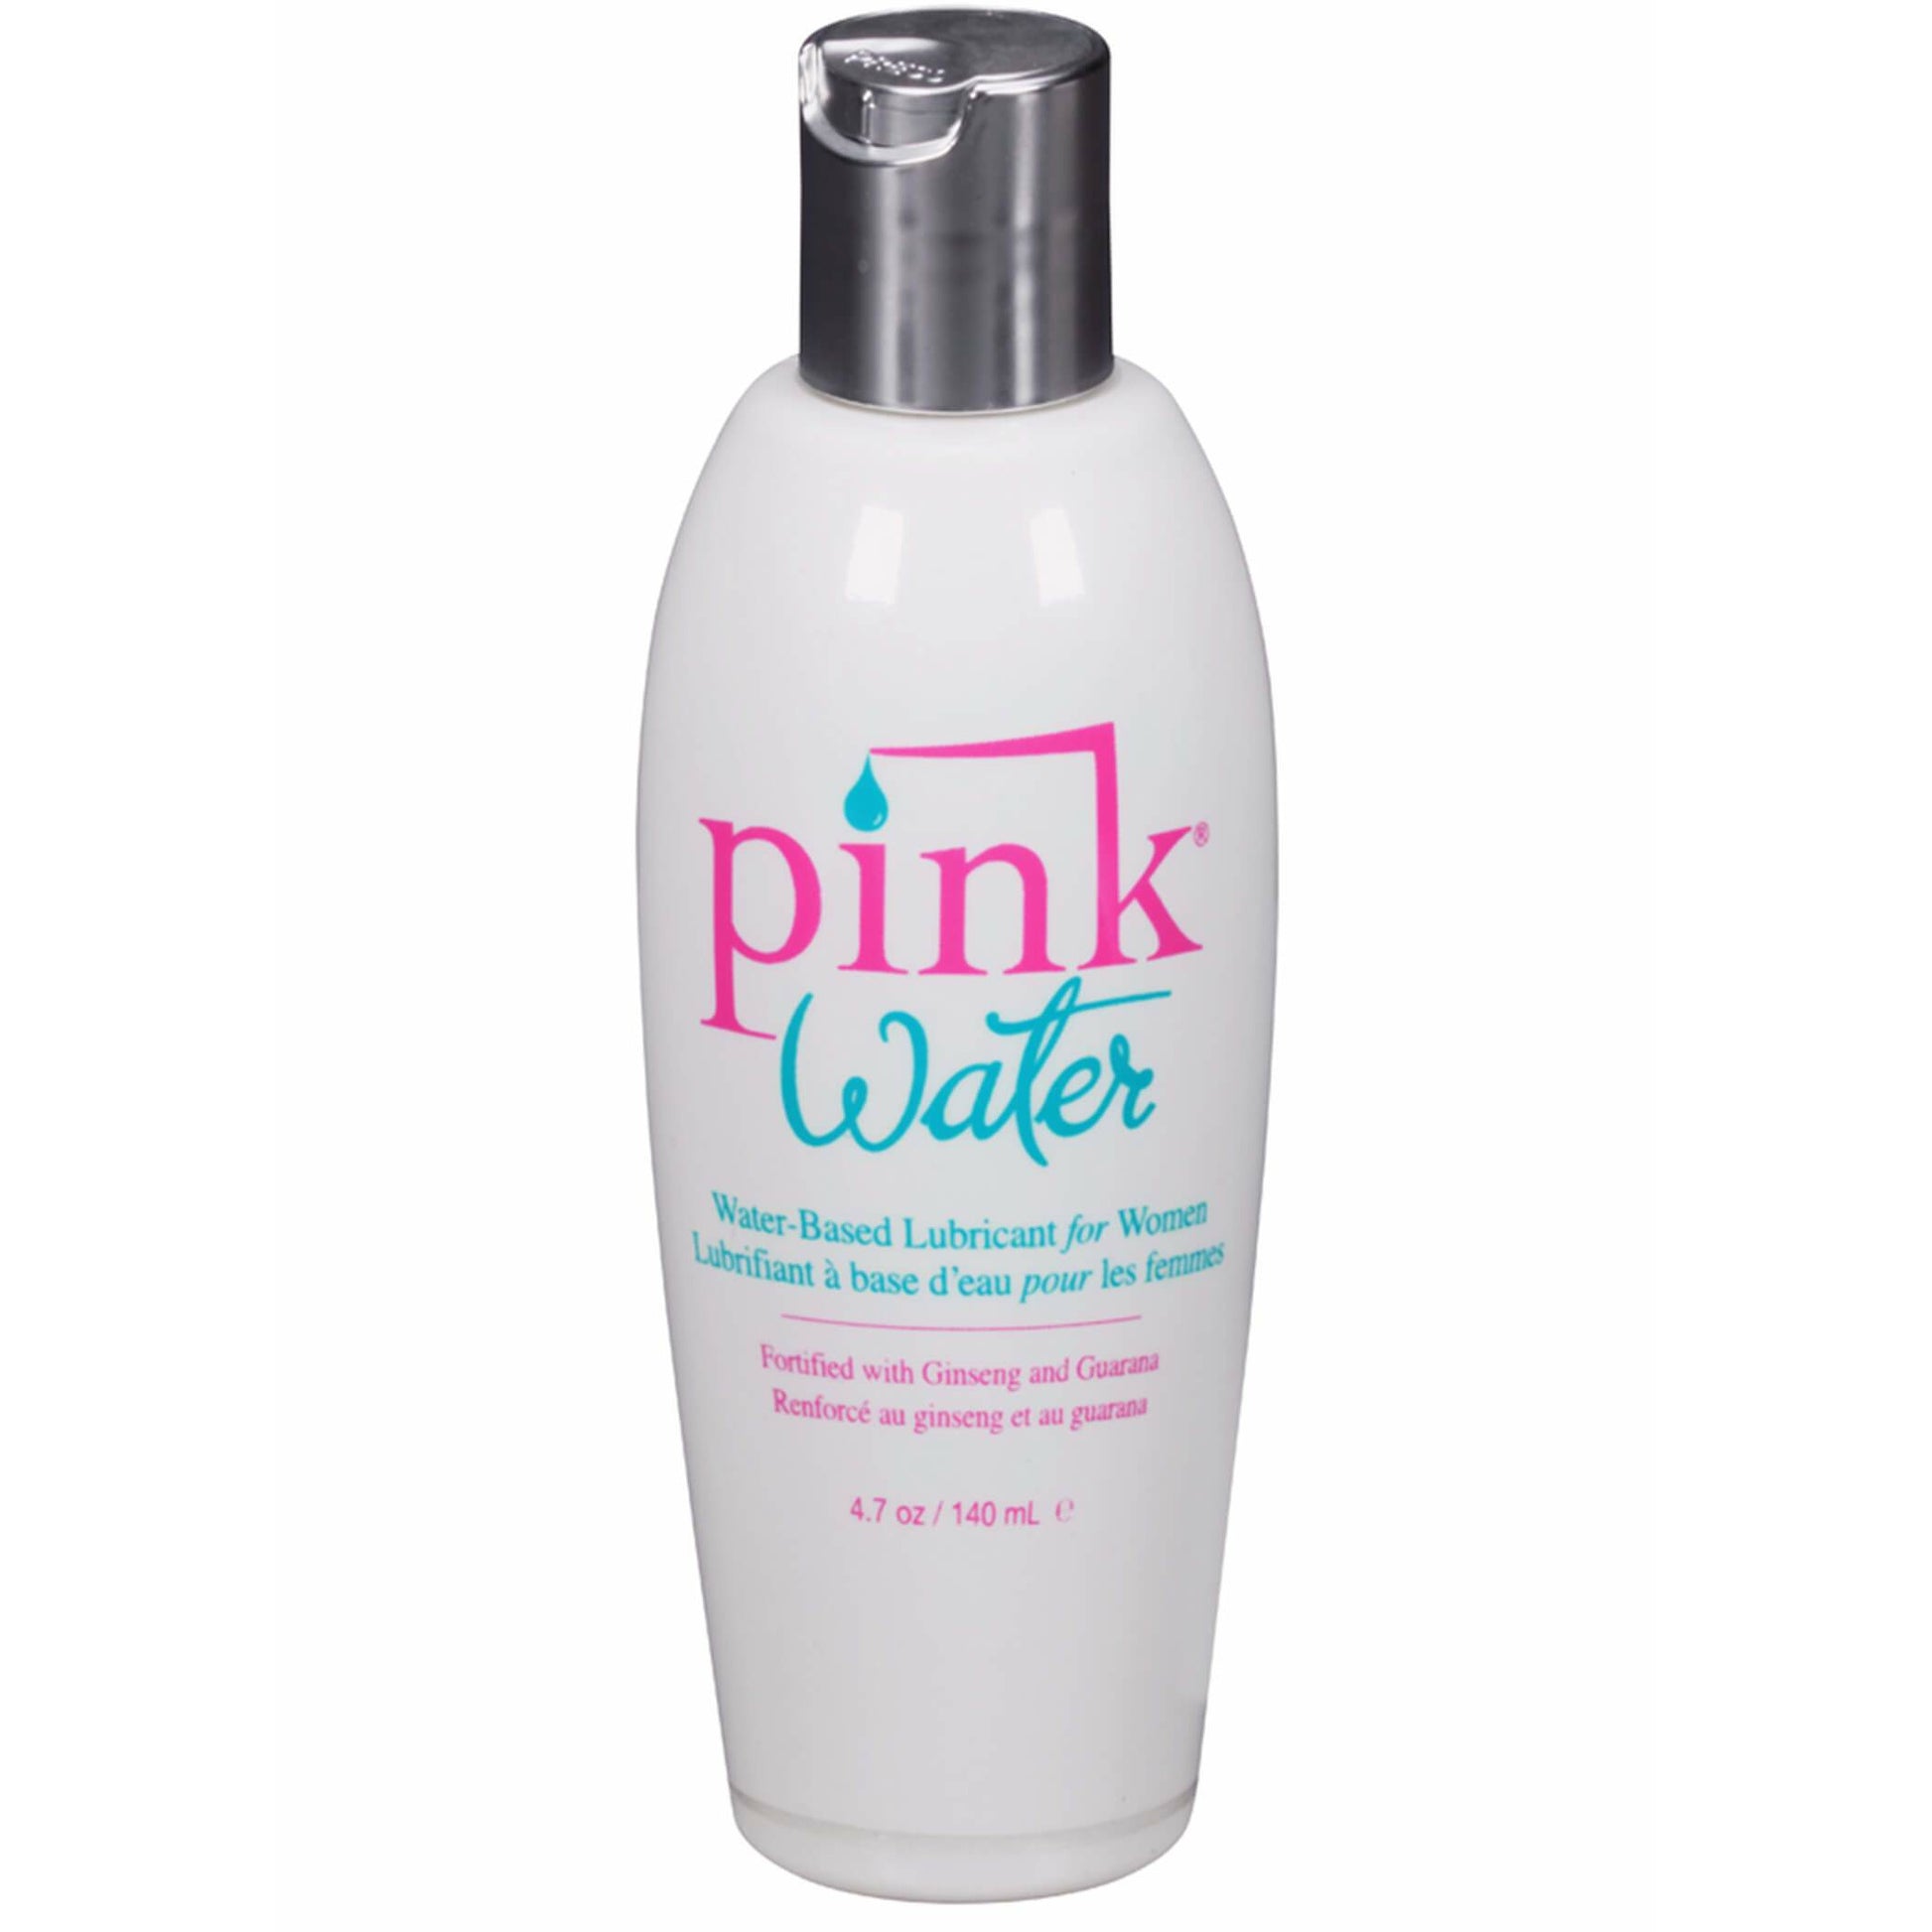 PINK Water Based Lubricant - The Bigger O online sex toy shop USA, Canada & UK shipping available